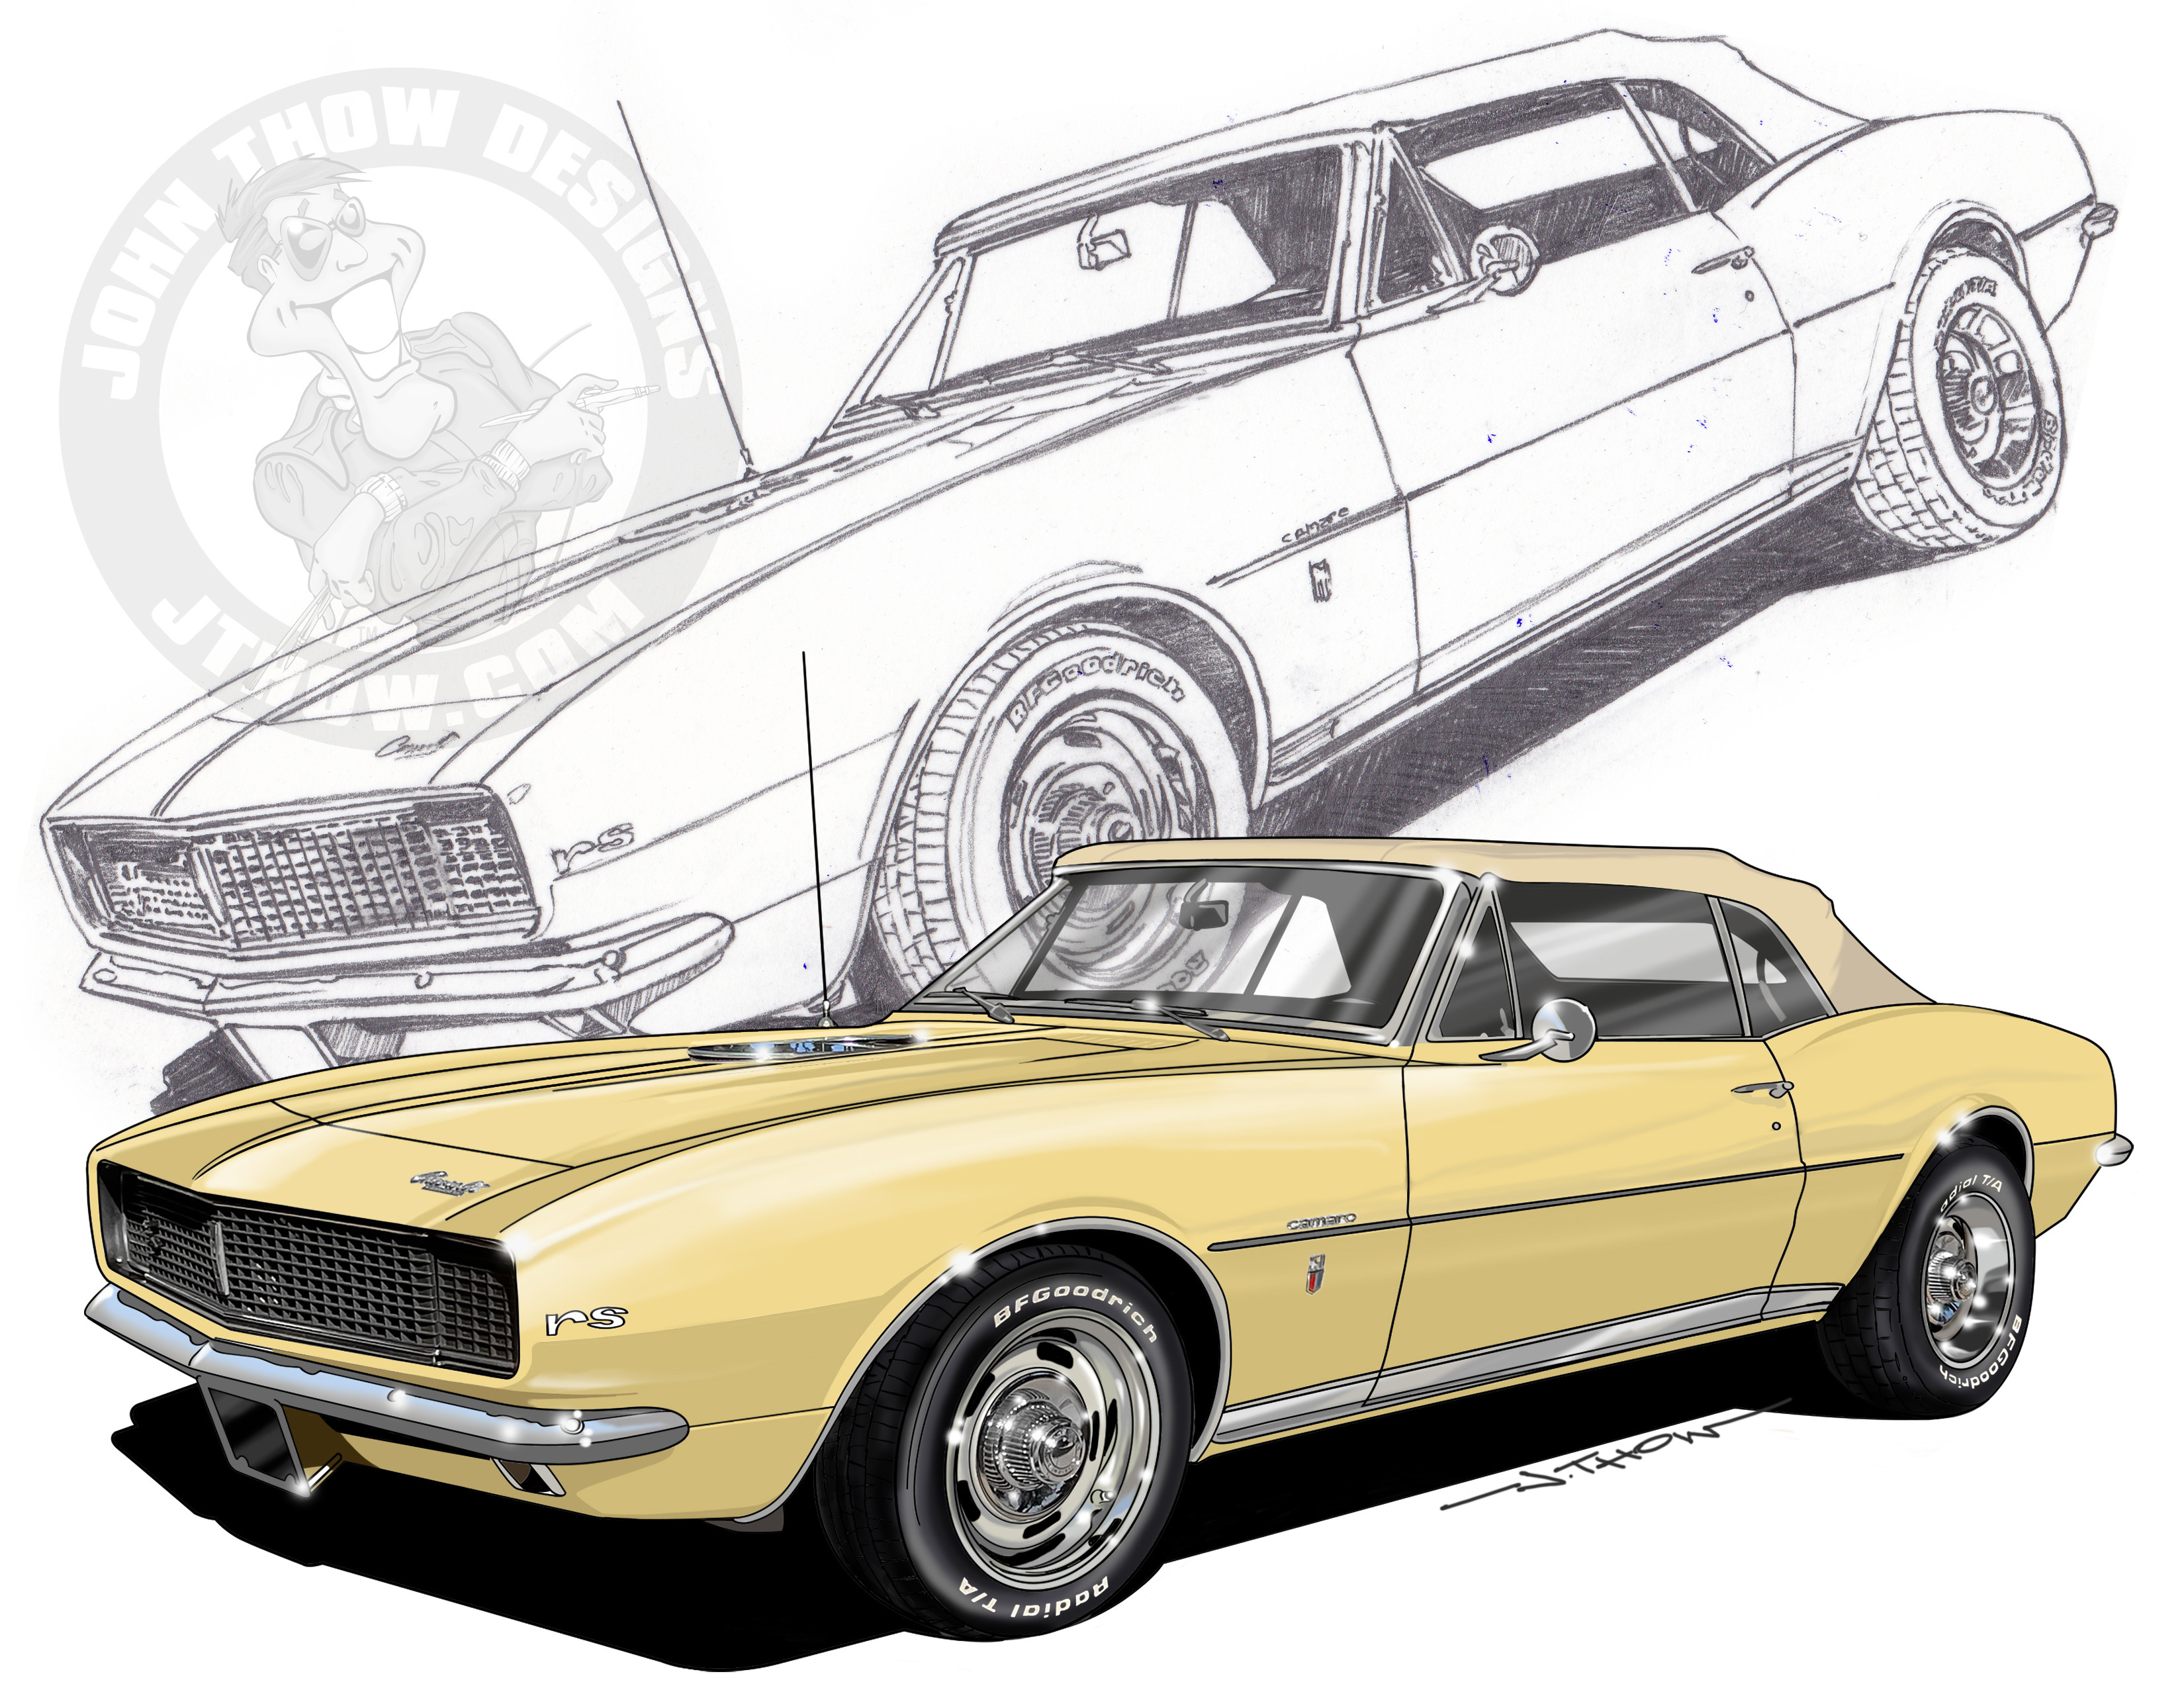 The original sketch and close up detail view of the 1968 Camaro from the 2022 Wheels N Windmills Car Show Art.